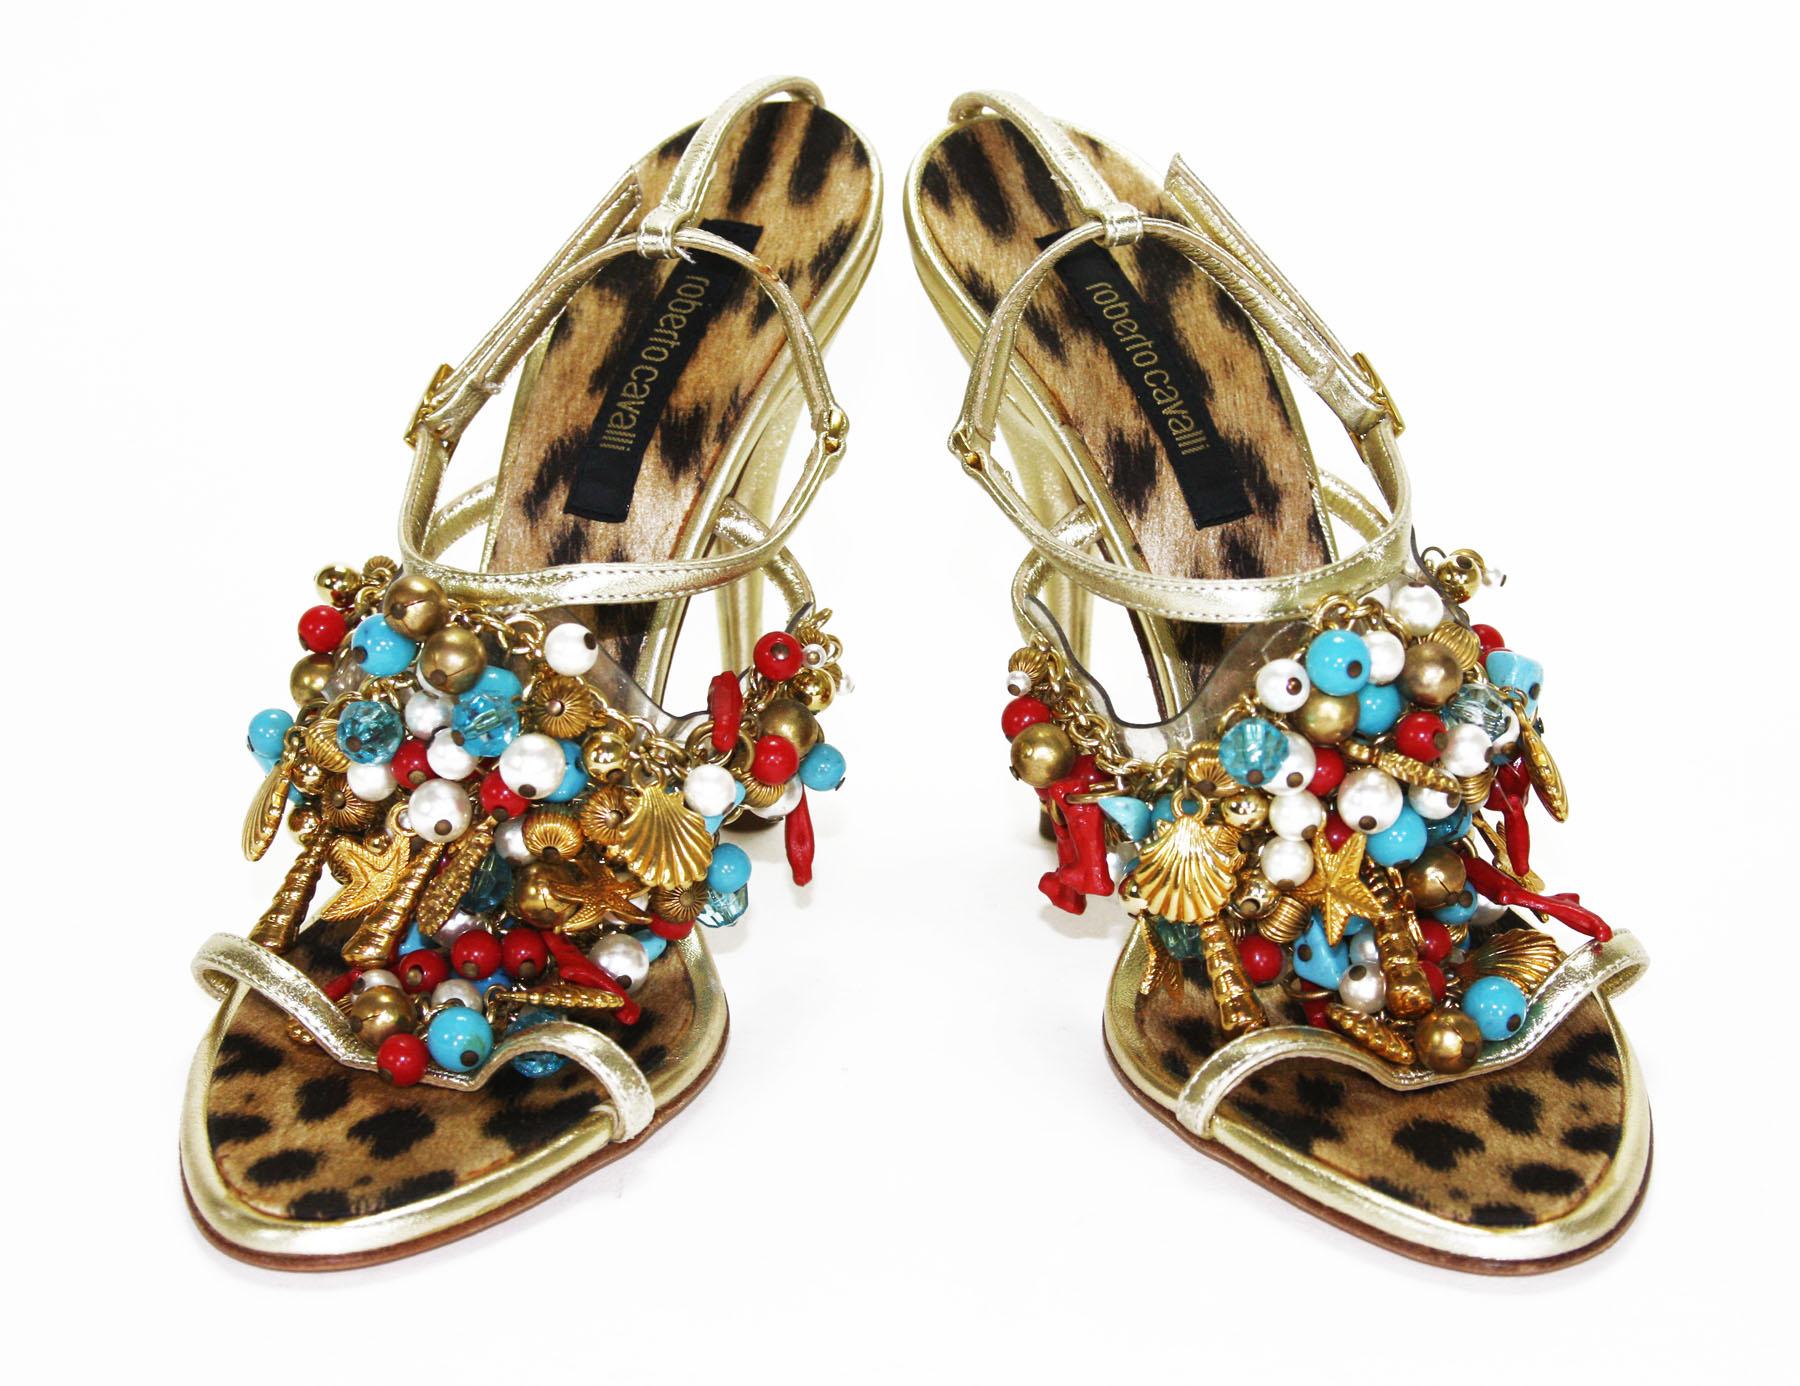 New Roberto Cavalli Embellished Gold Leather Shoes Sandals
Italian size 38.5 - US 8.5
Gold seashells, seahorses and stars; Red coral; White pearls; Red, white and turquoise colored beads - all of them comes together at the same time to decorate